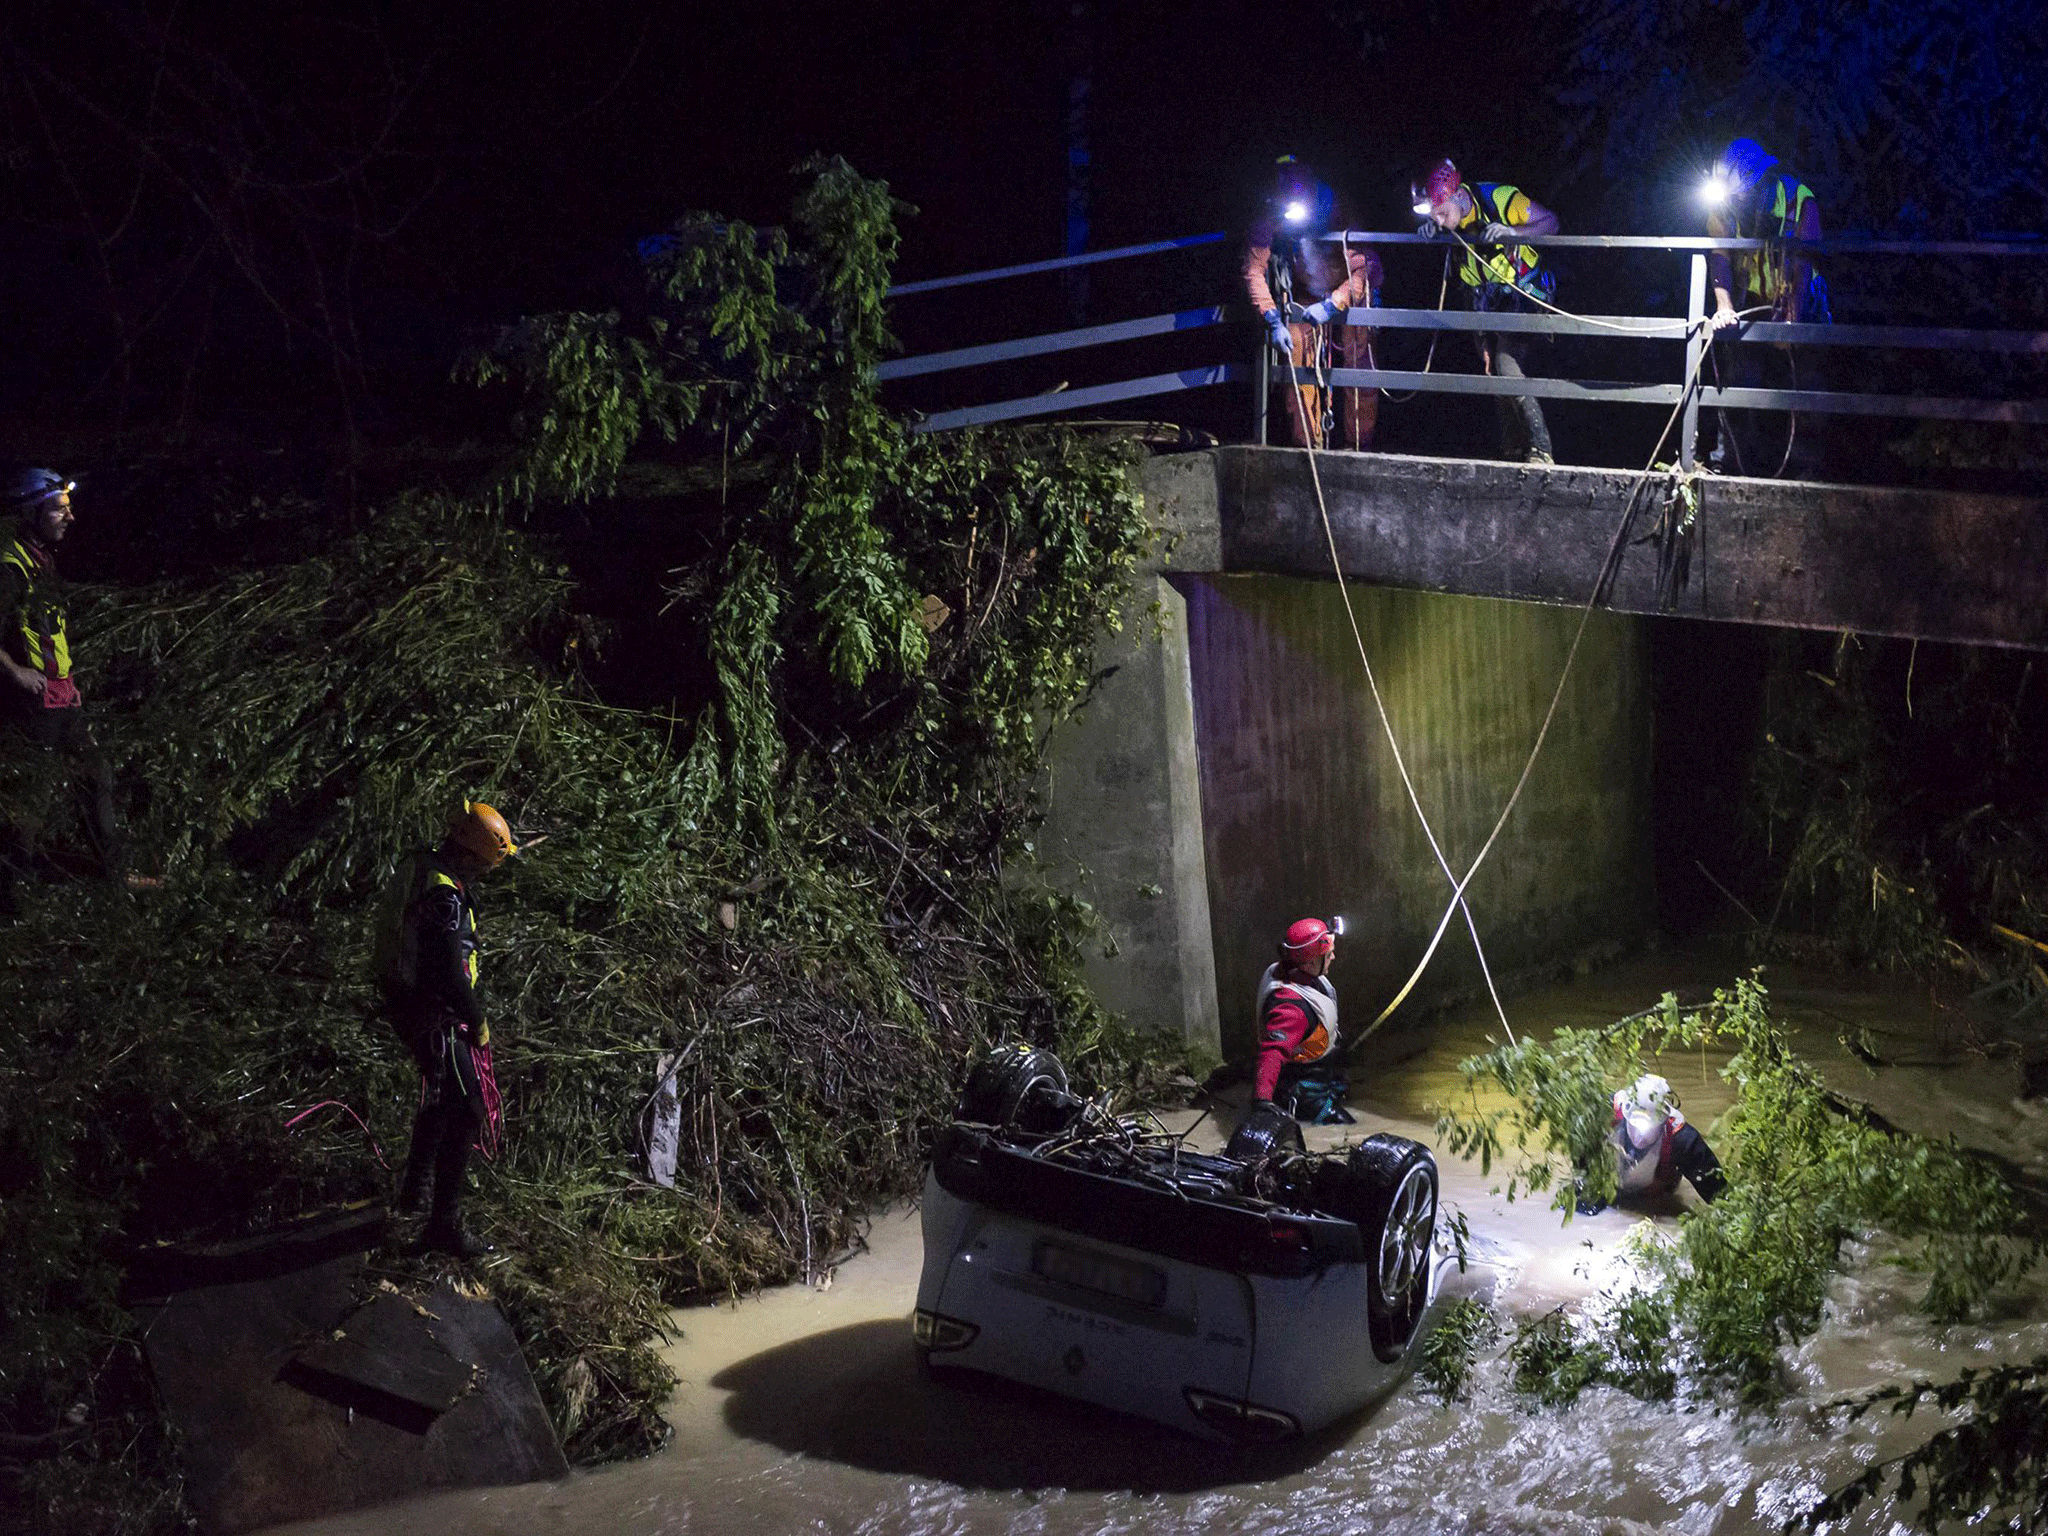 Rescuers search for a missing person inside a car swept away by a torrent near Treviso, northern Italy